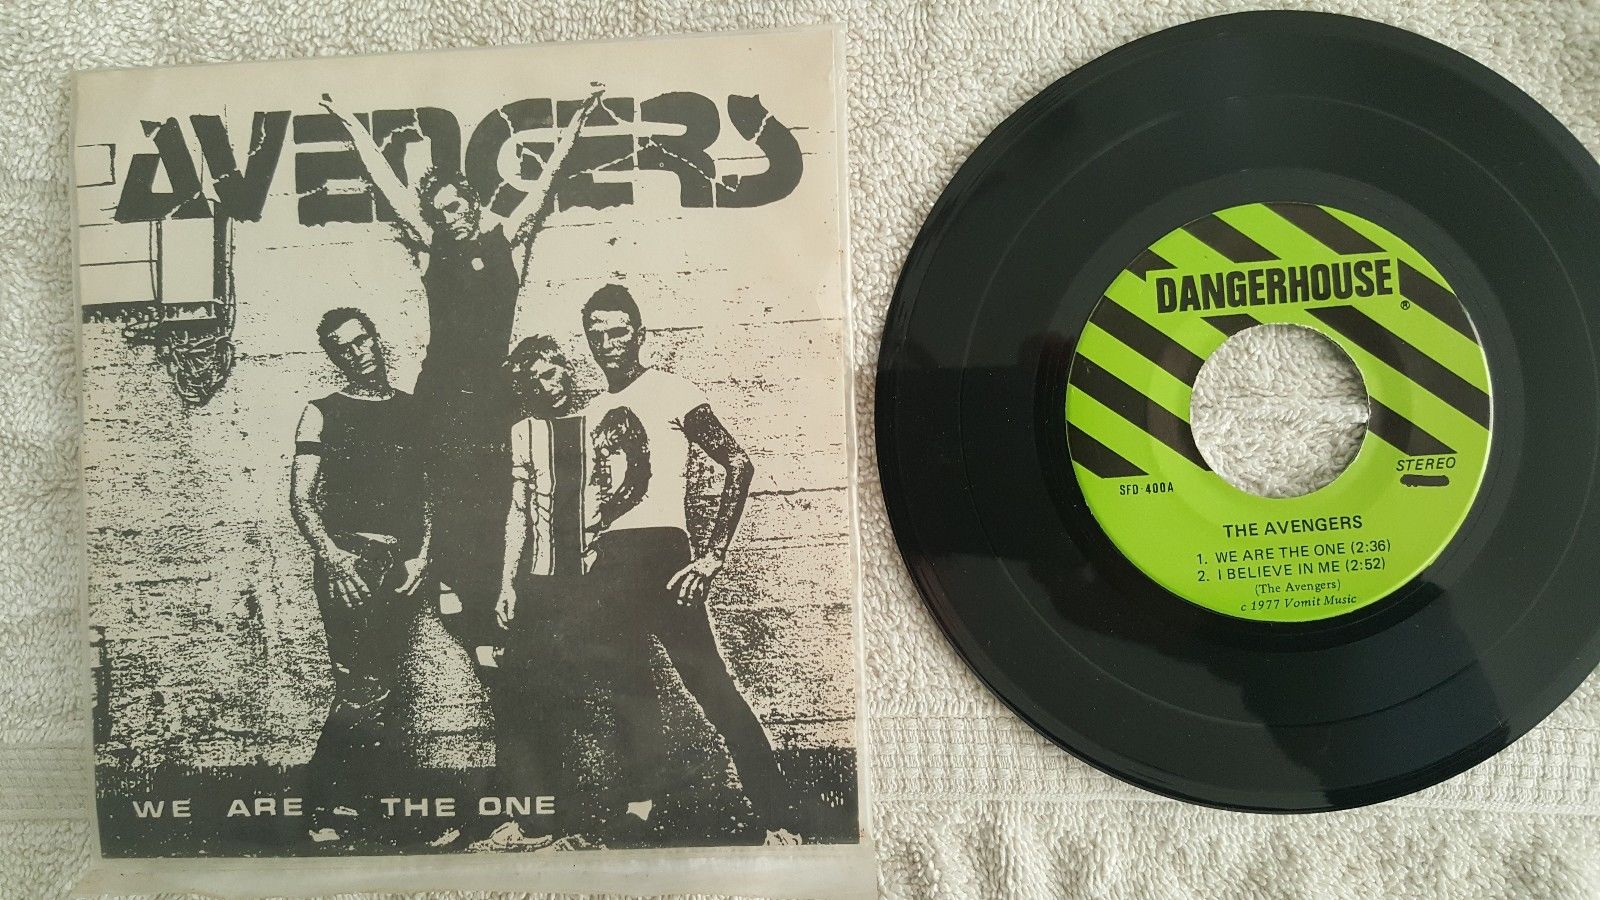 The Avengers - We Are The One 7"  LA PUNK 1977 - misprint label ?